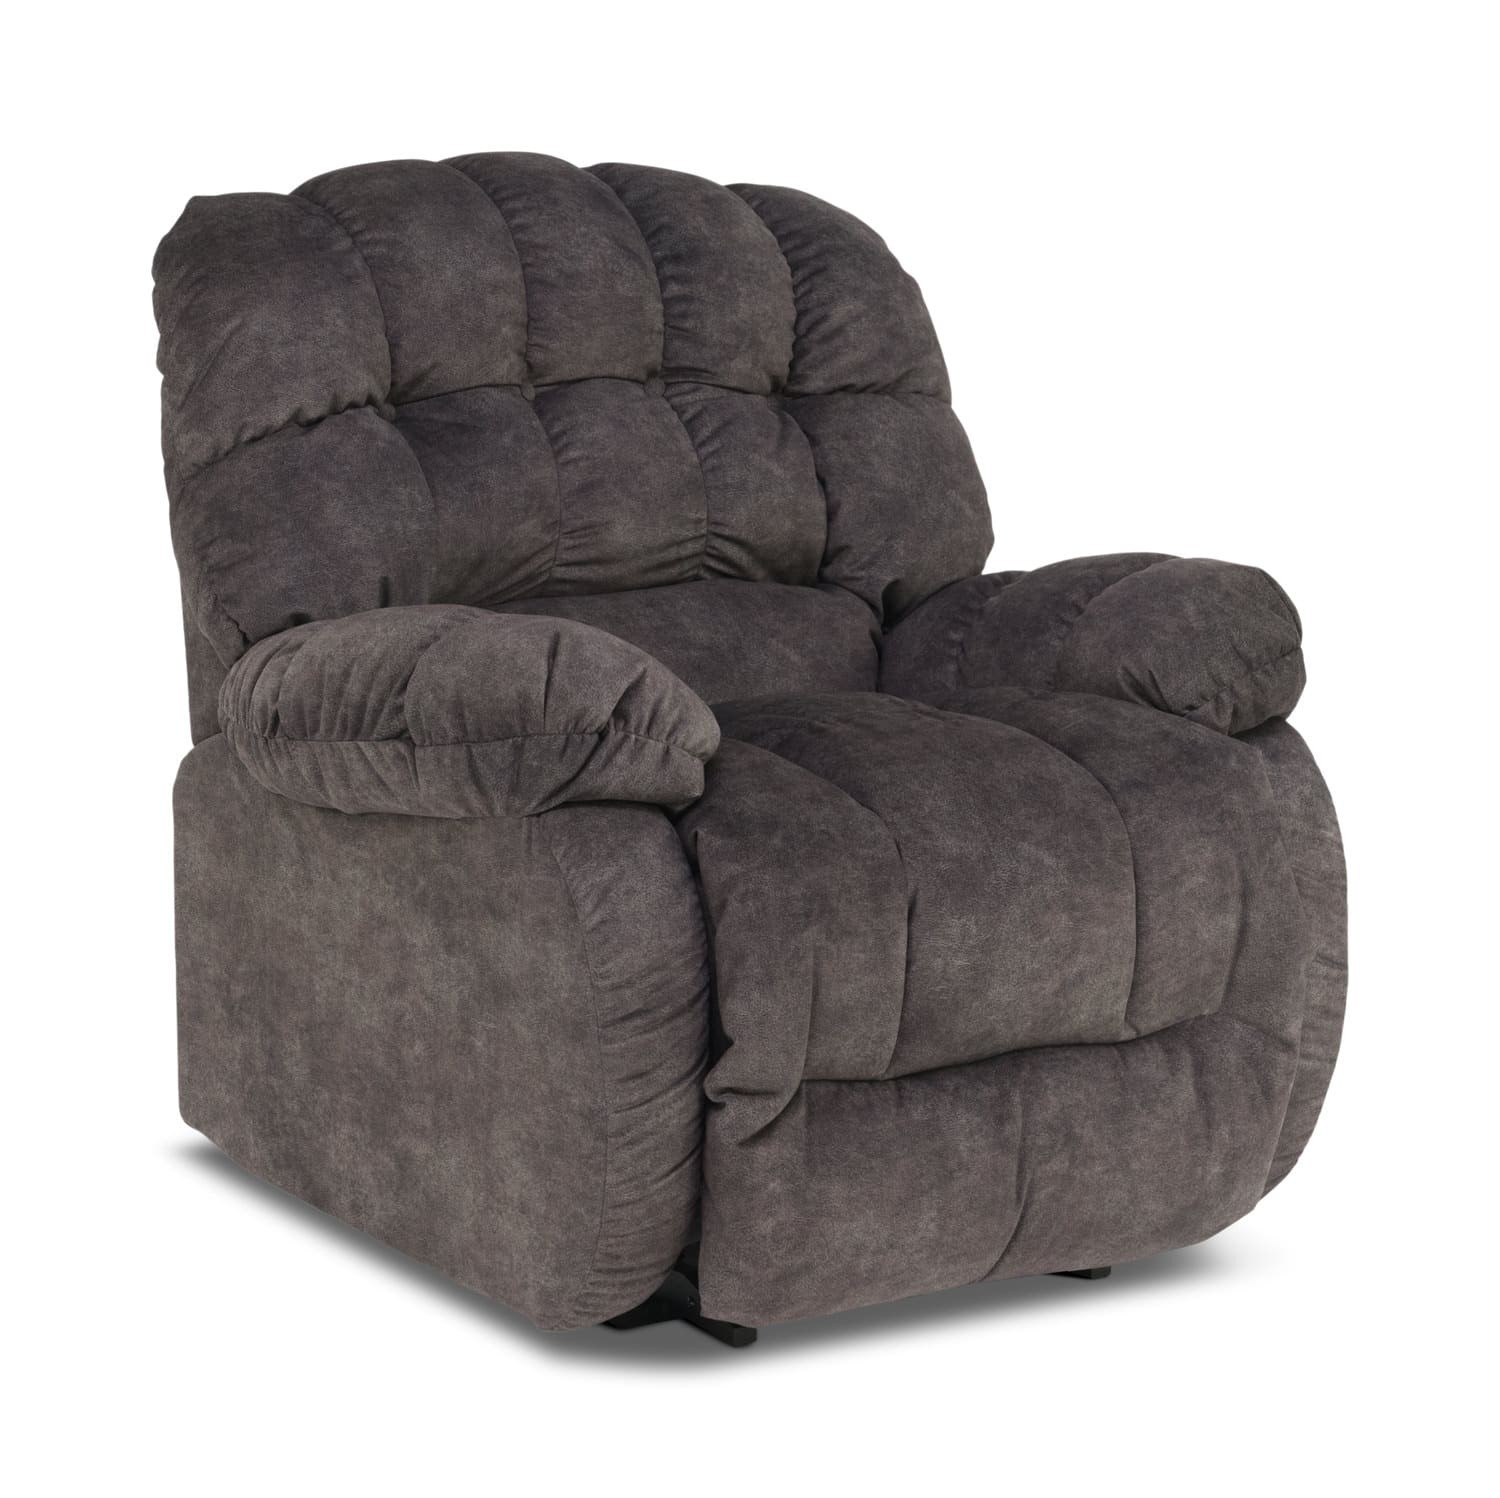 Best oversized recliner top big man recliners for tall 1